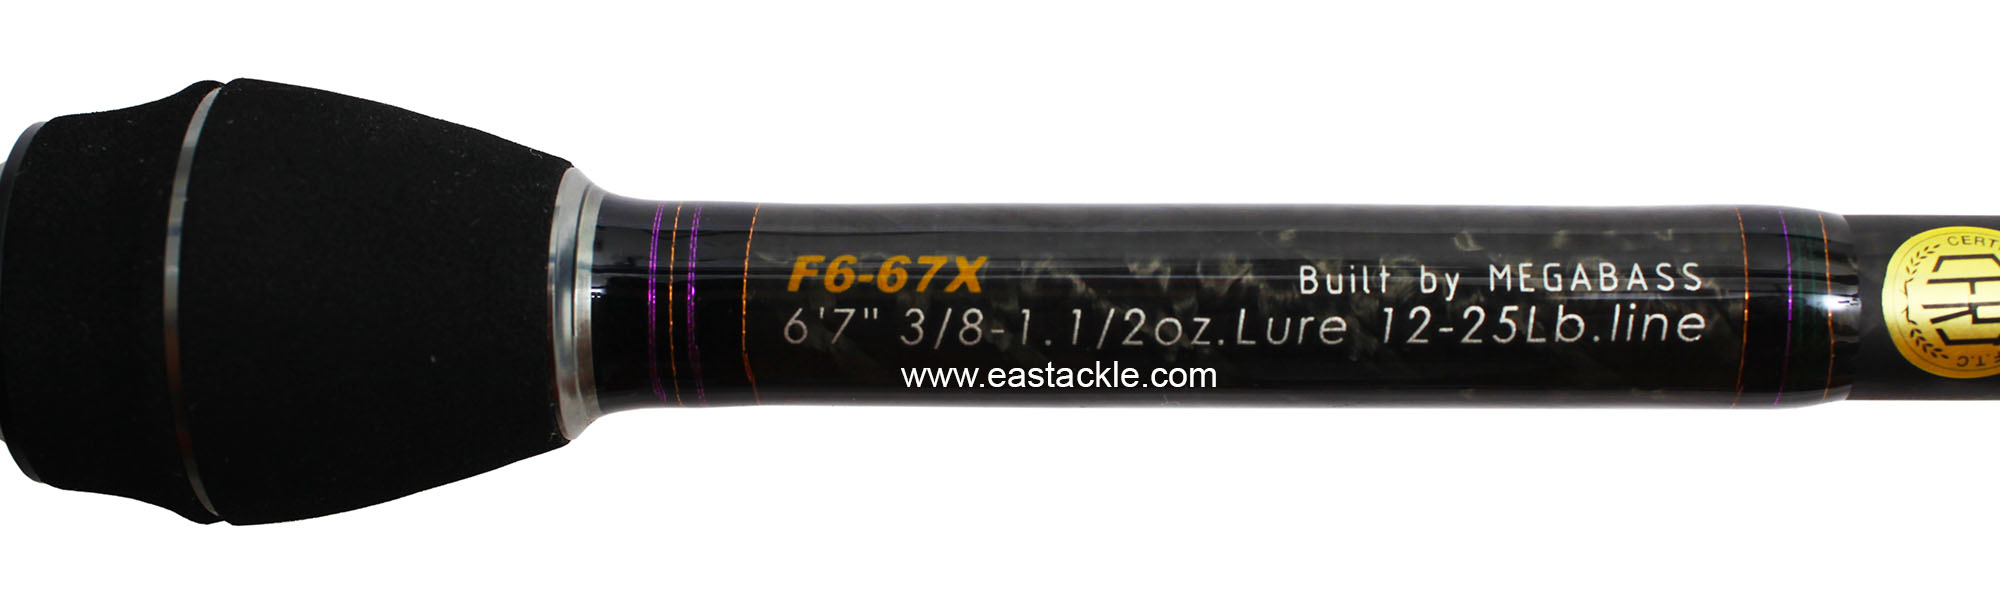 Megabass - Destroyer Phase 3 - F6-67X - G-AX - Bait Casting Rod - Blank Specifications (Under View) | Eastackle